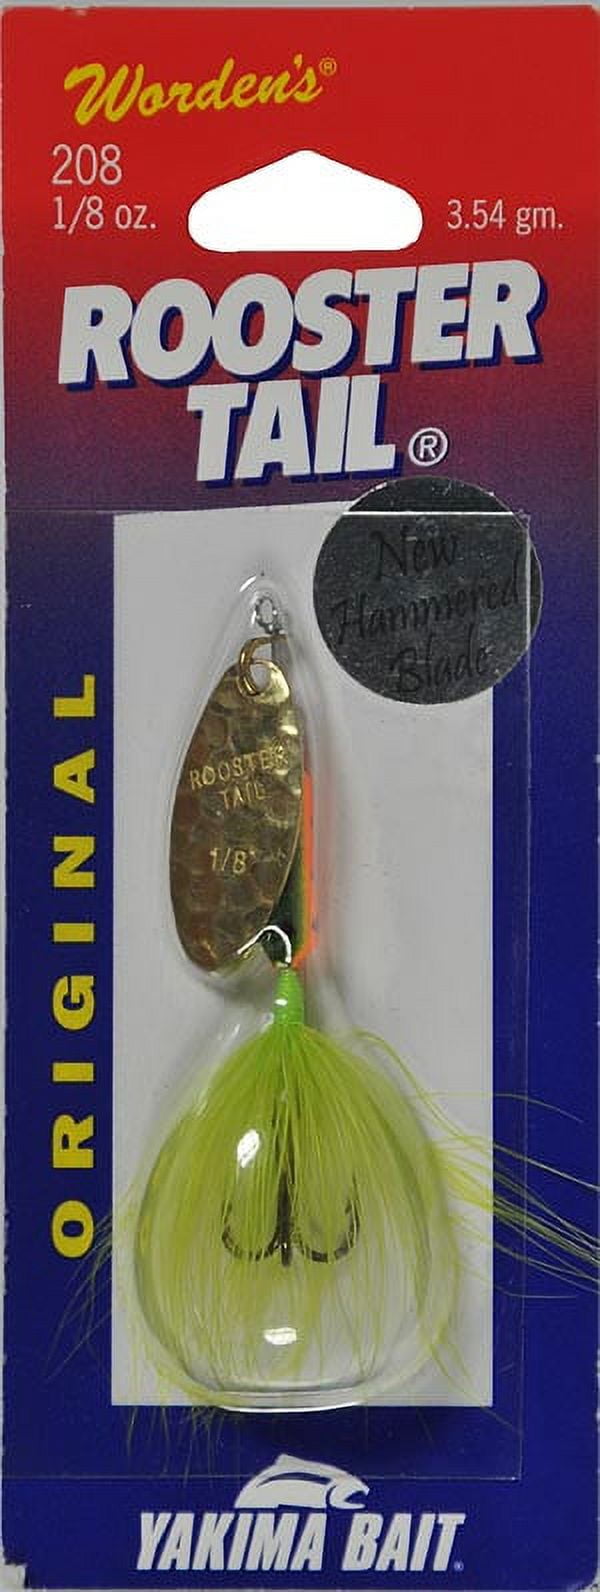 Worden's Rooster Tail, Inline Spinnerbait Fishing Lure, Hammered